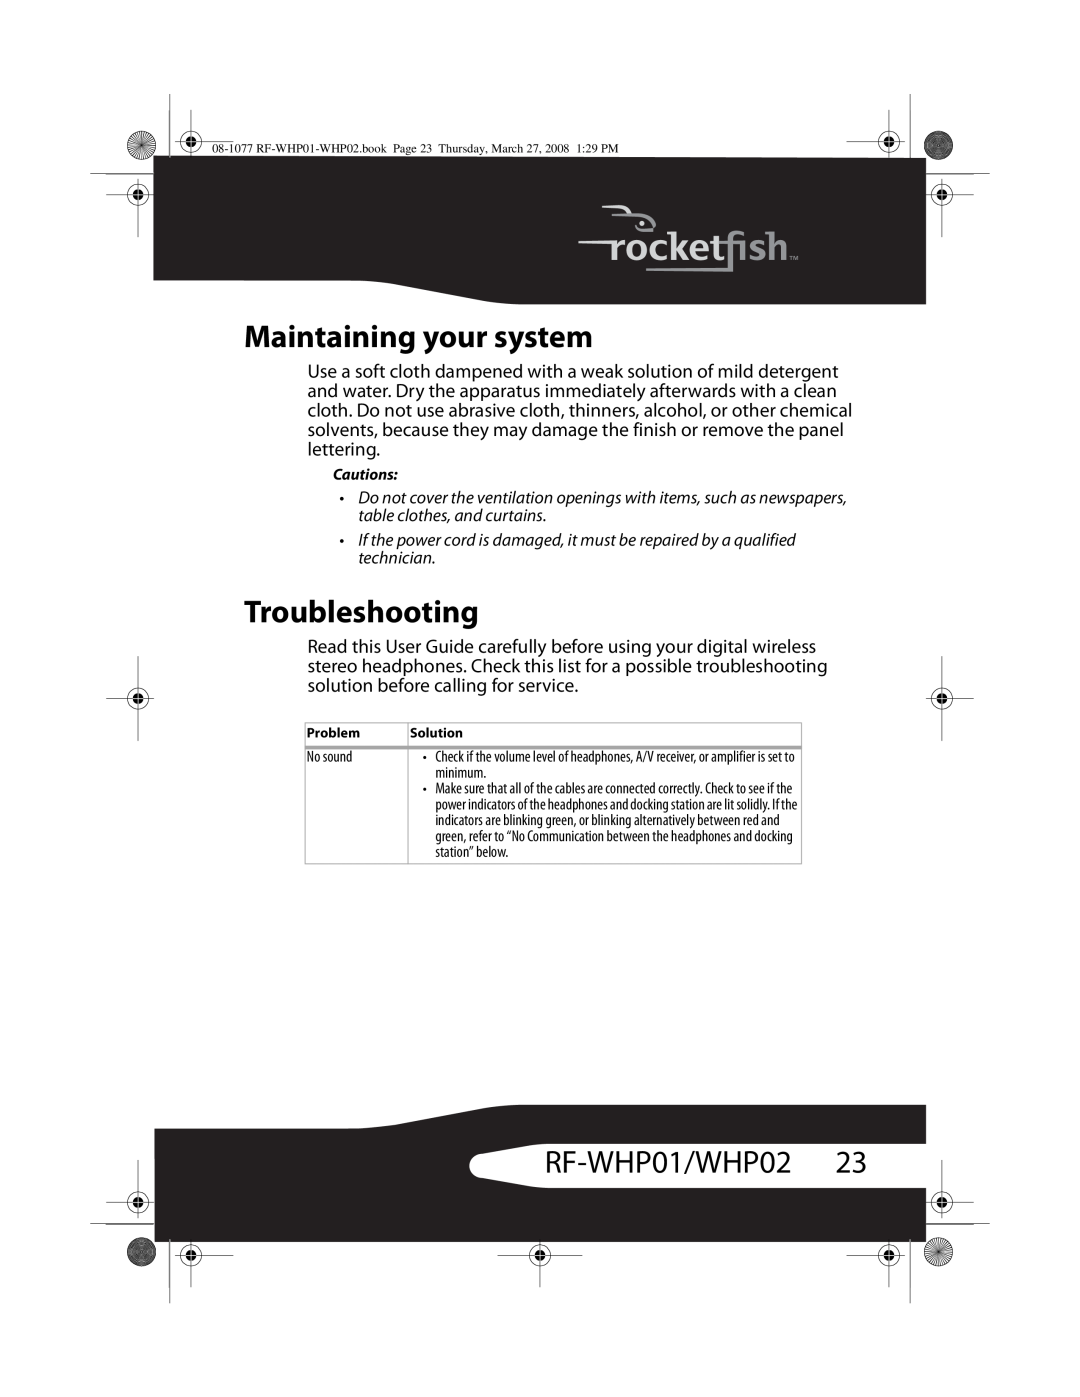 RocketFish RF-WHP02 manual Maintaining your system, Troubleshooting, RF-WHP01/WHP0223 